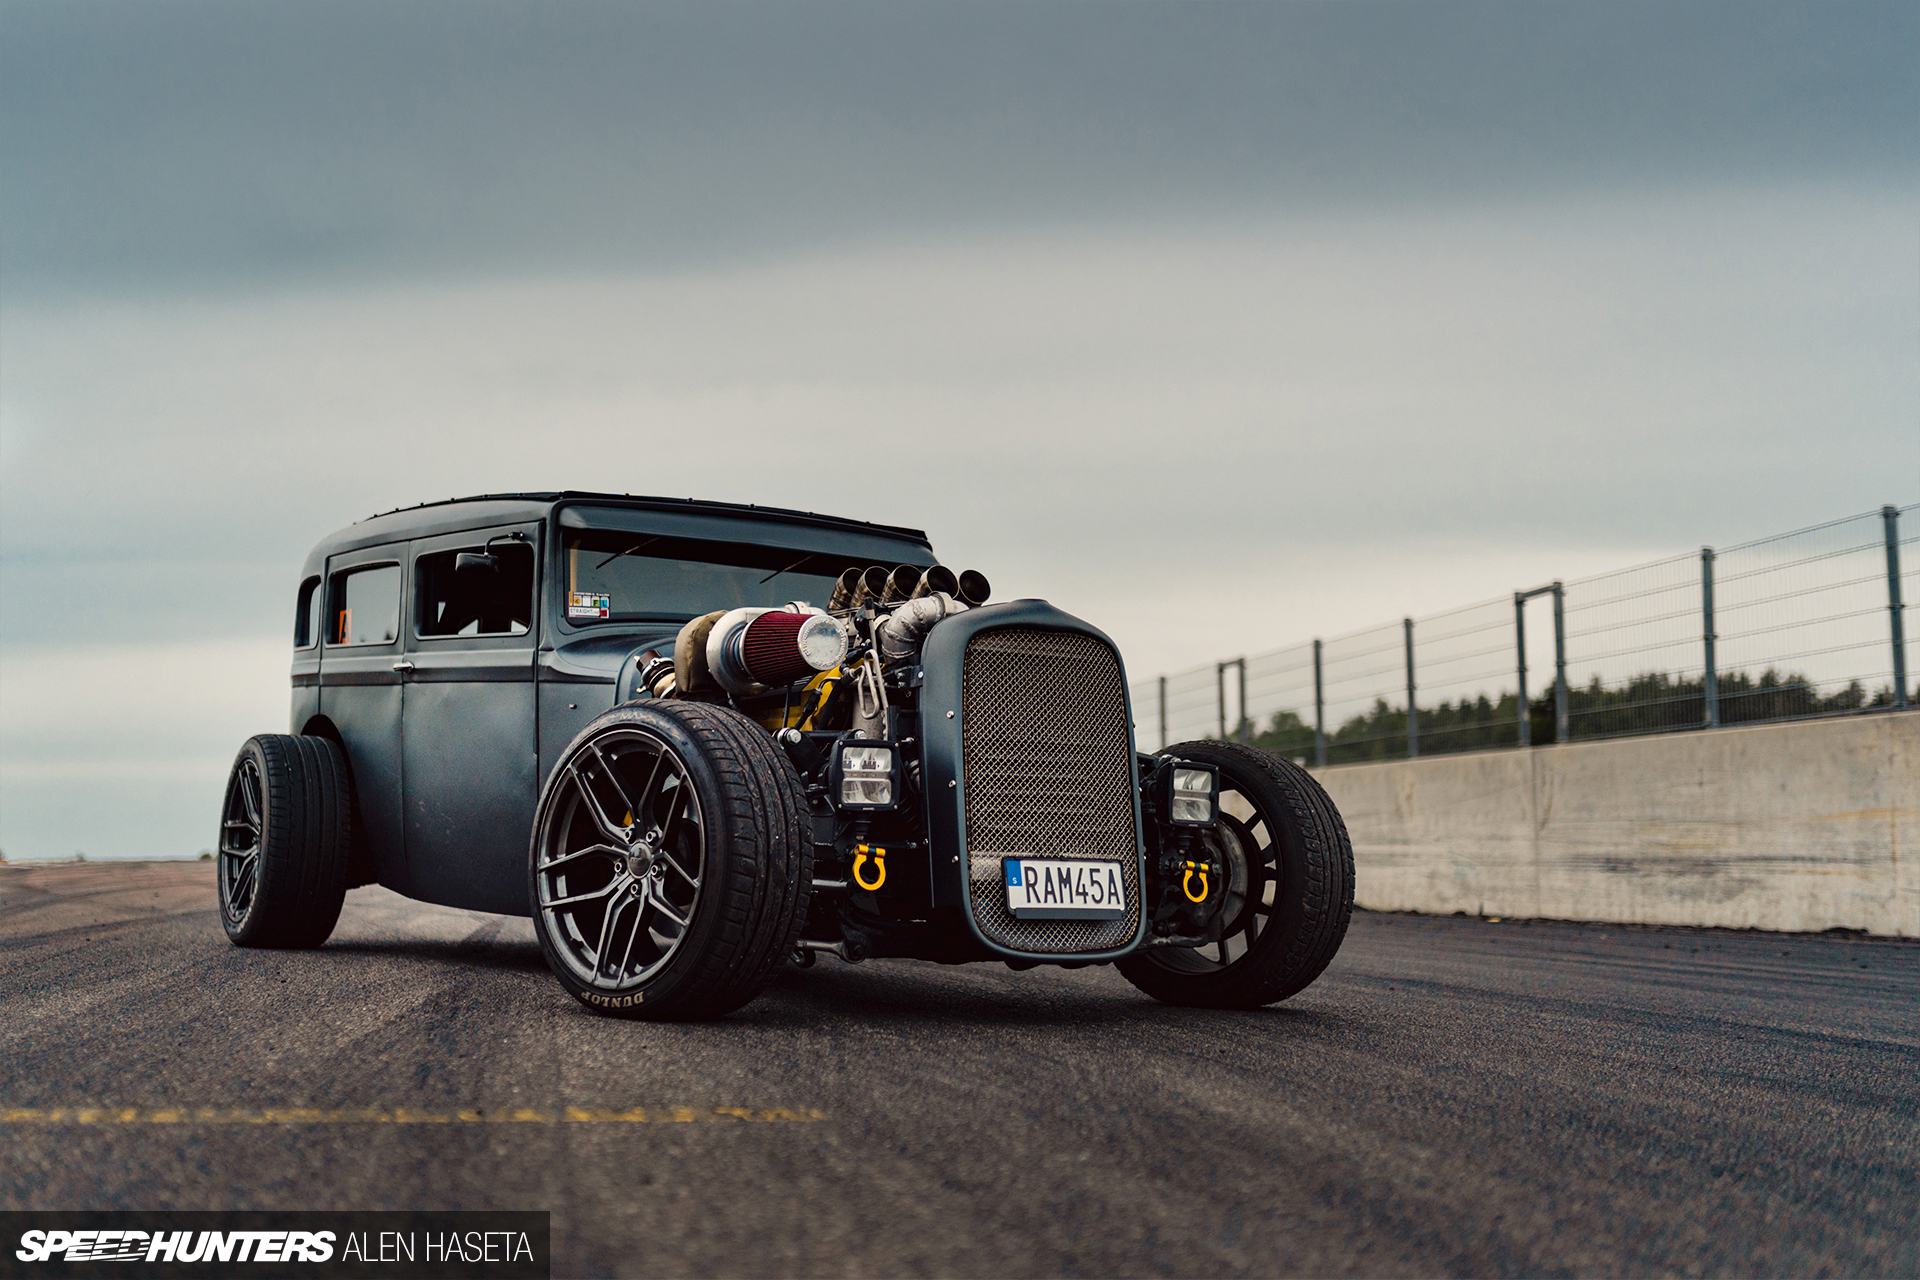 Old Meets New In A BMW-Based Hudson Hot Rod